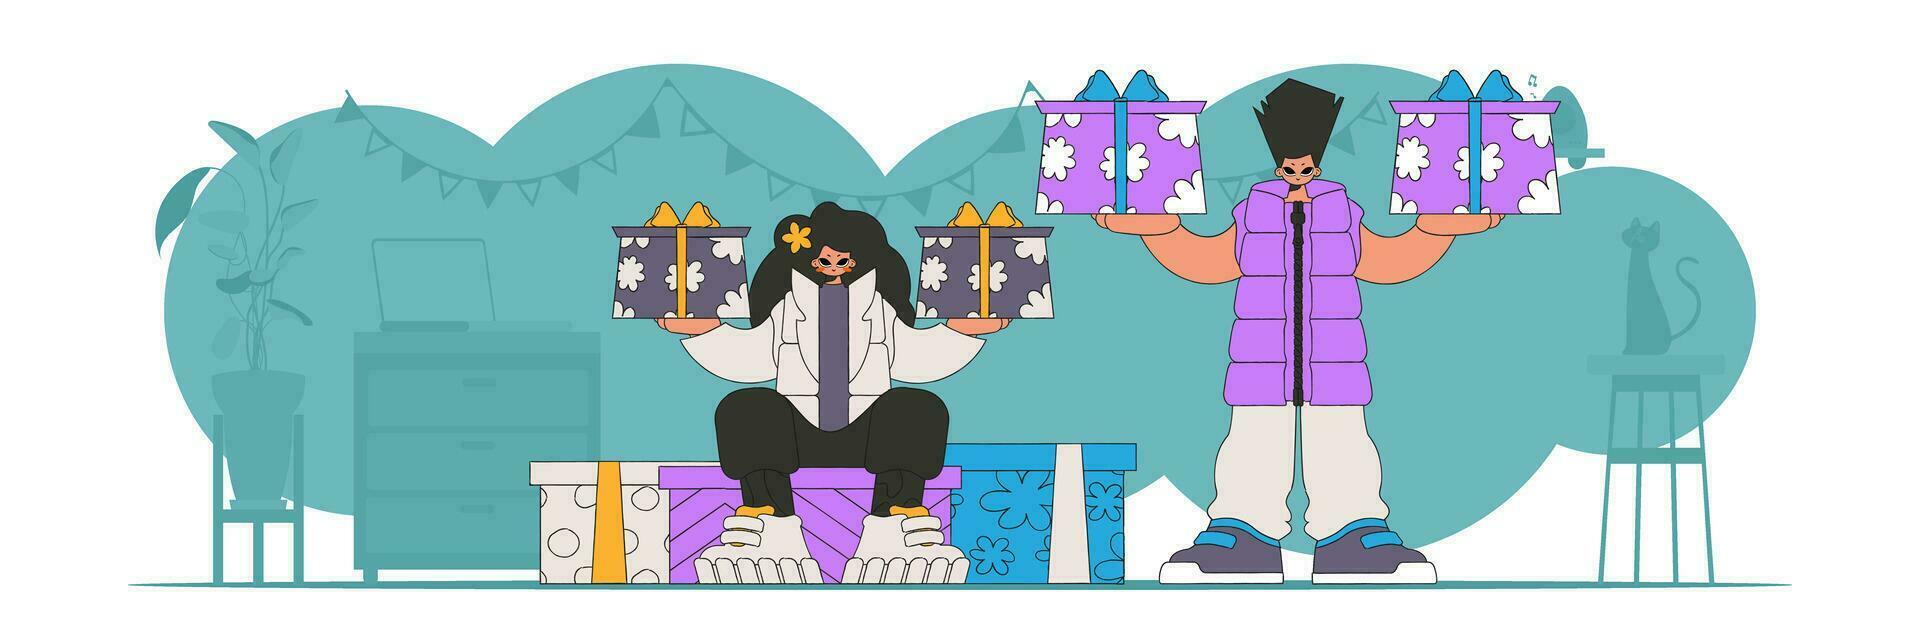 90s style. The girl and the guy are holding two gifts in their hands. Holiday surprise concept. vector